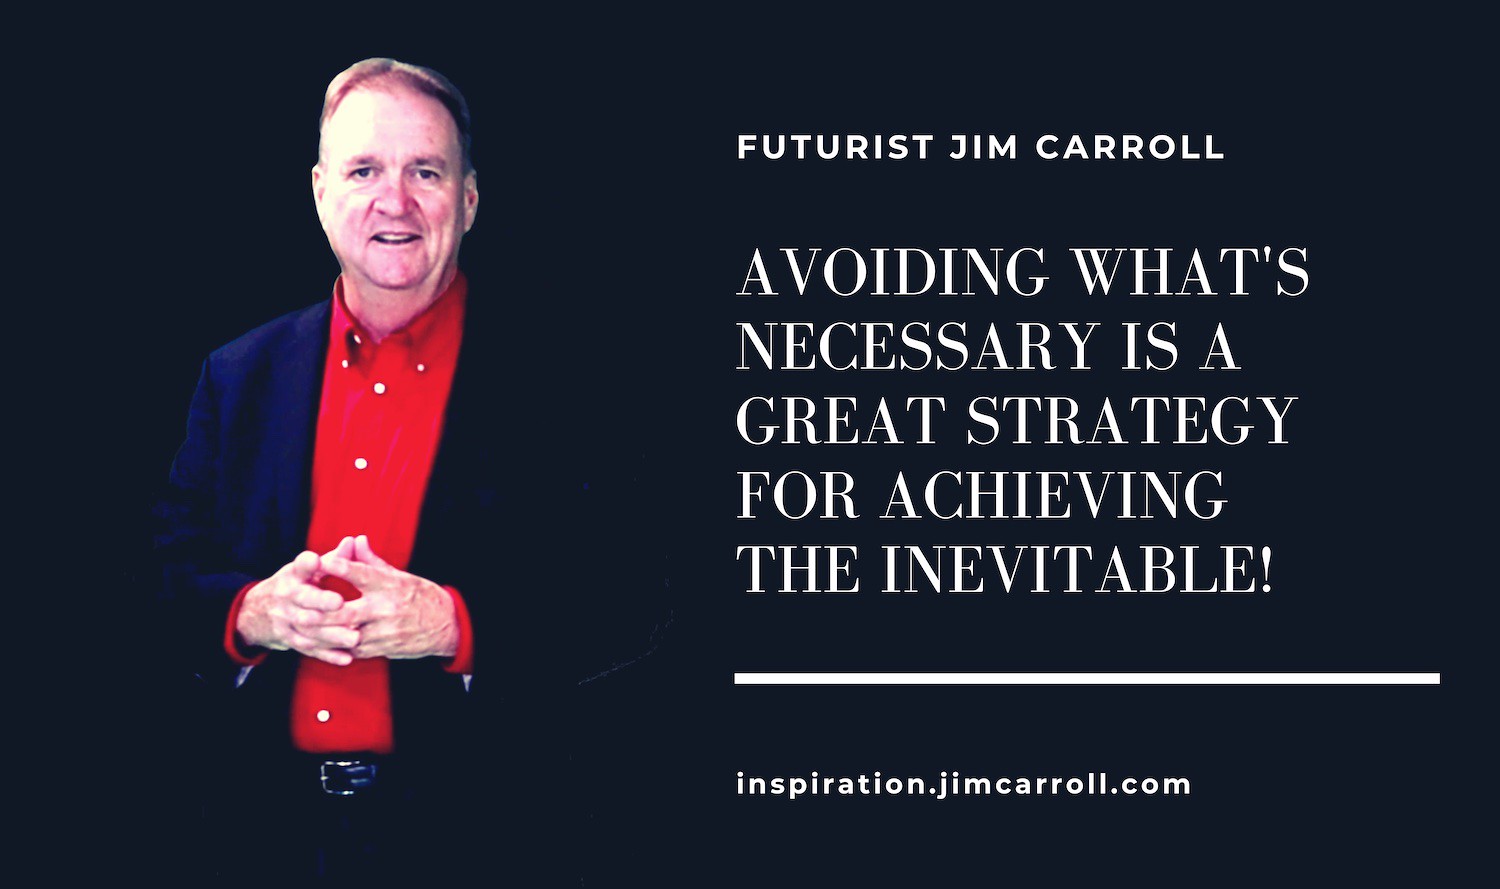 "Avoiding what's necessary is a great strategy for achieving the inevitable!" - Futurist Jim Carroll